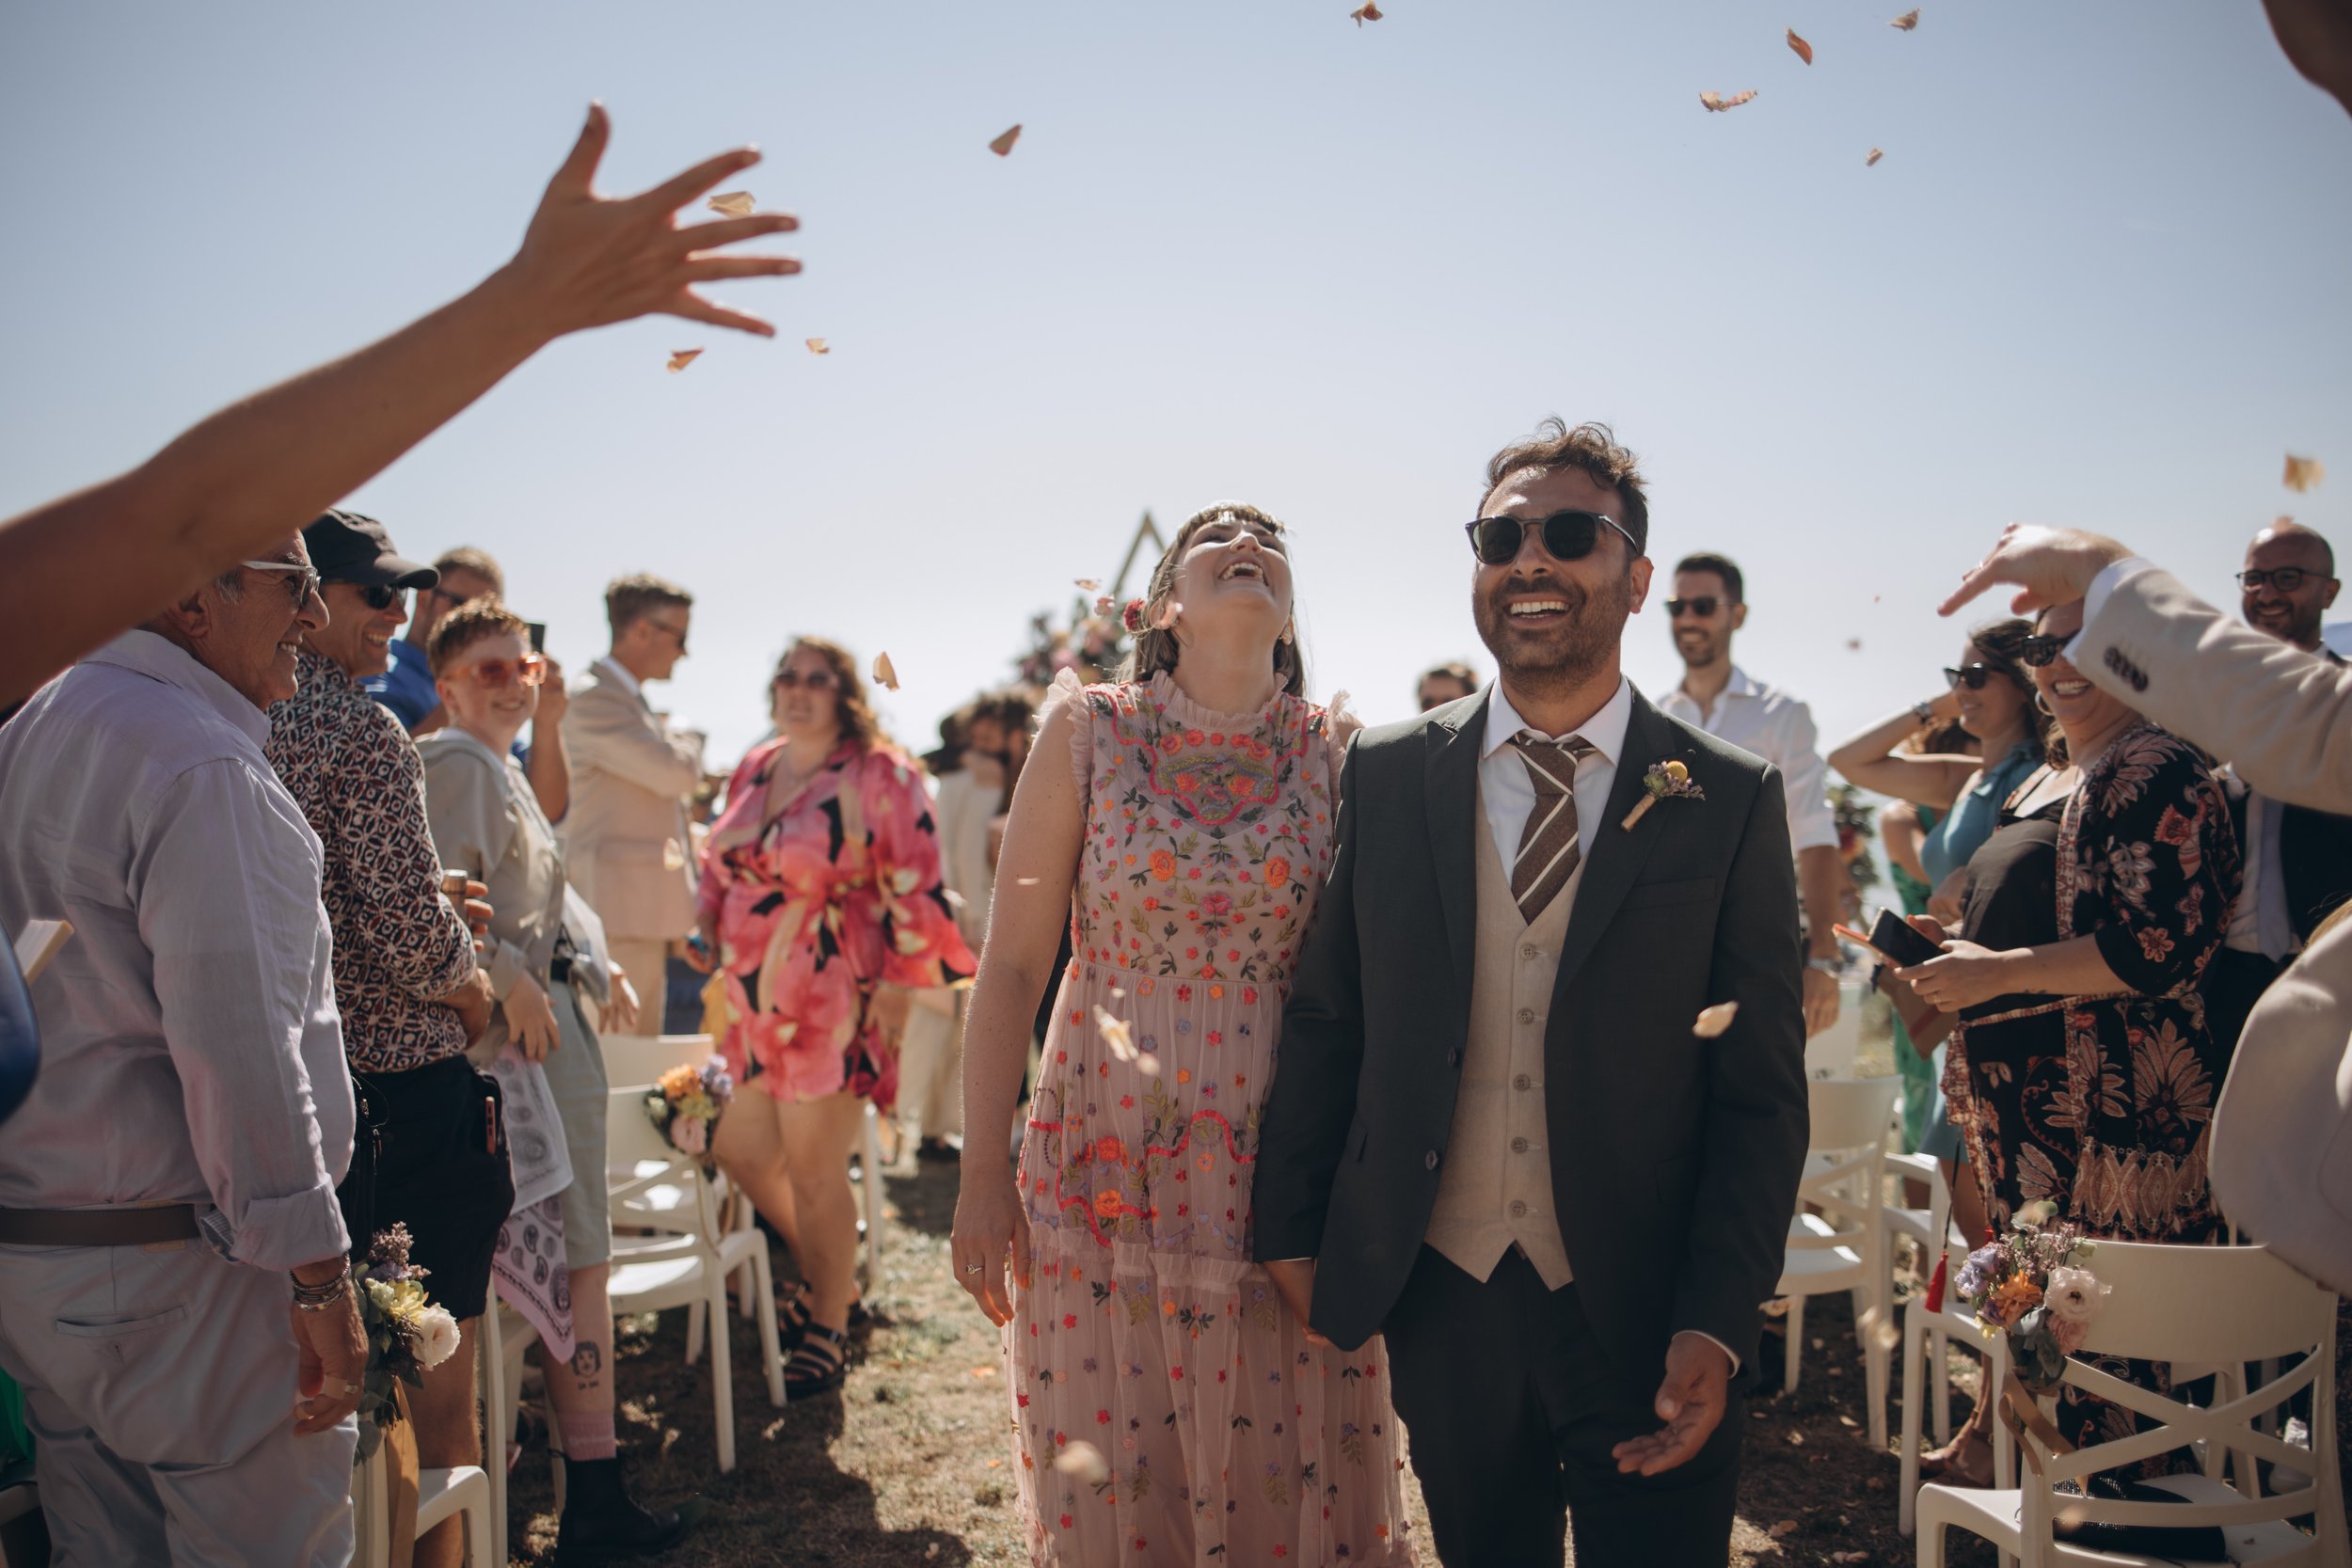  Bride and groom can be seen laughing as they walk back up the aisle on the beach after their funny ceremony led by the inclusive celebrant.  Photo by: Lisa Elisa Photography 